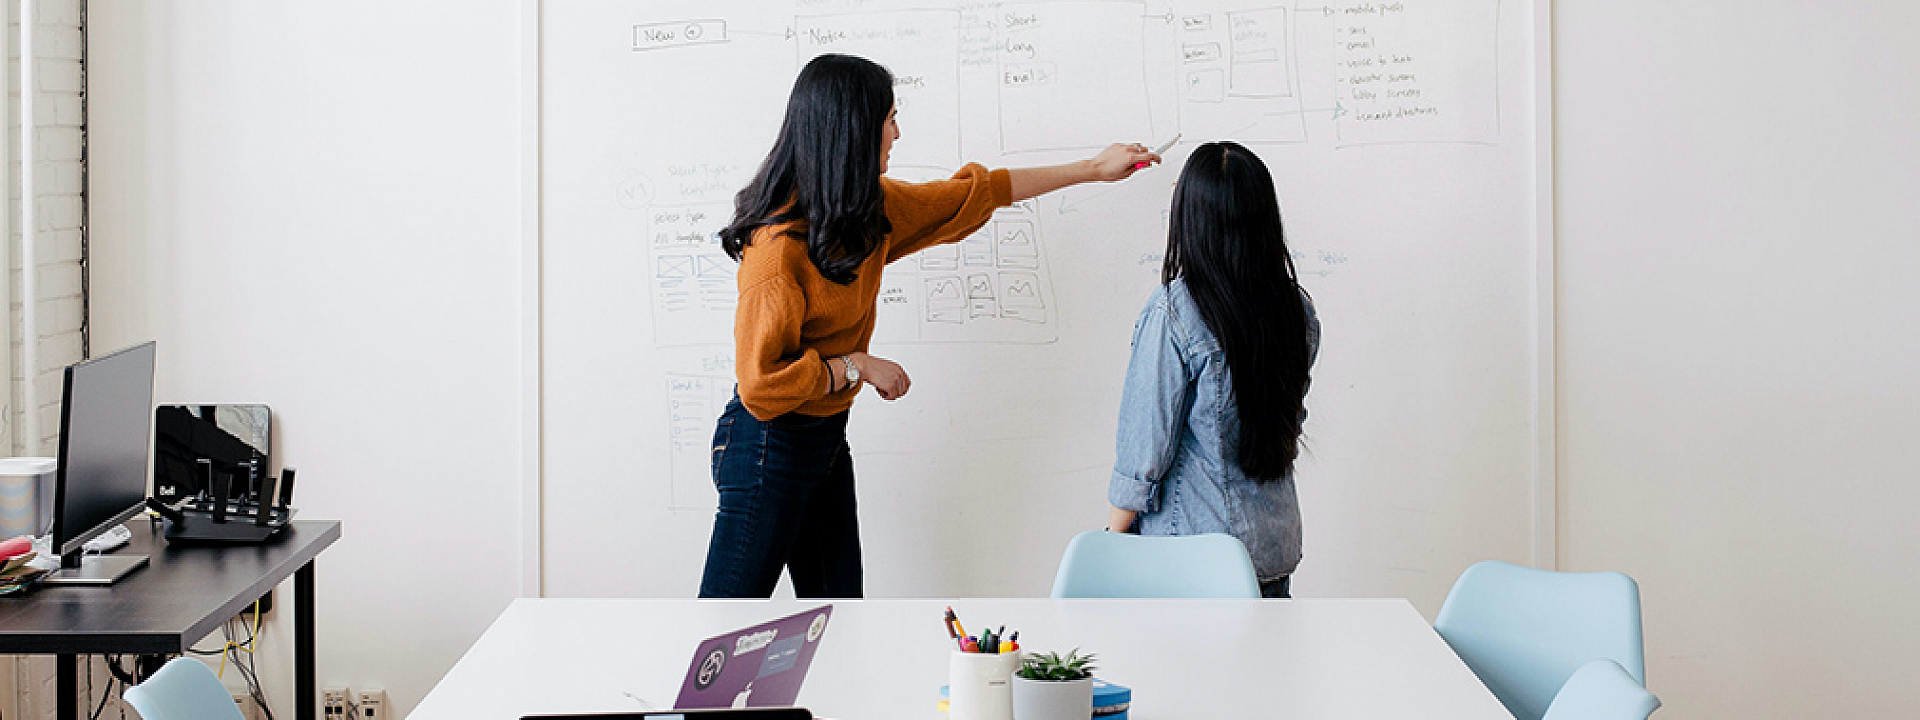 Two women working on a white board in a brainstorm session